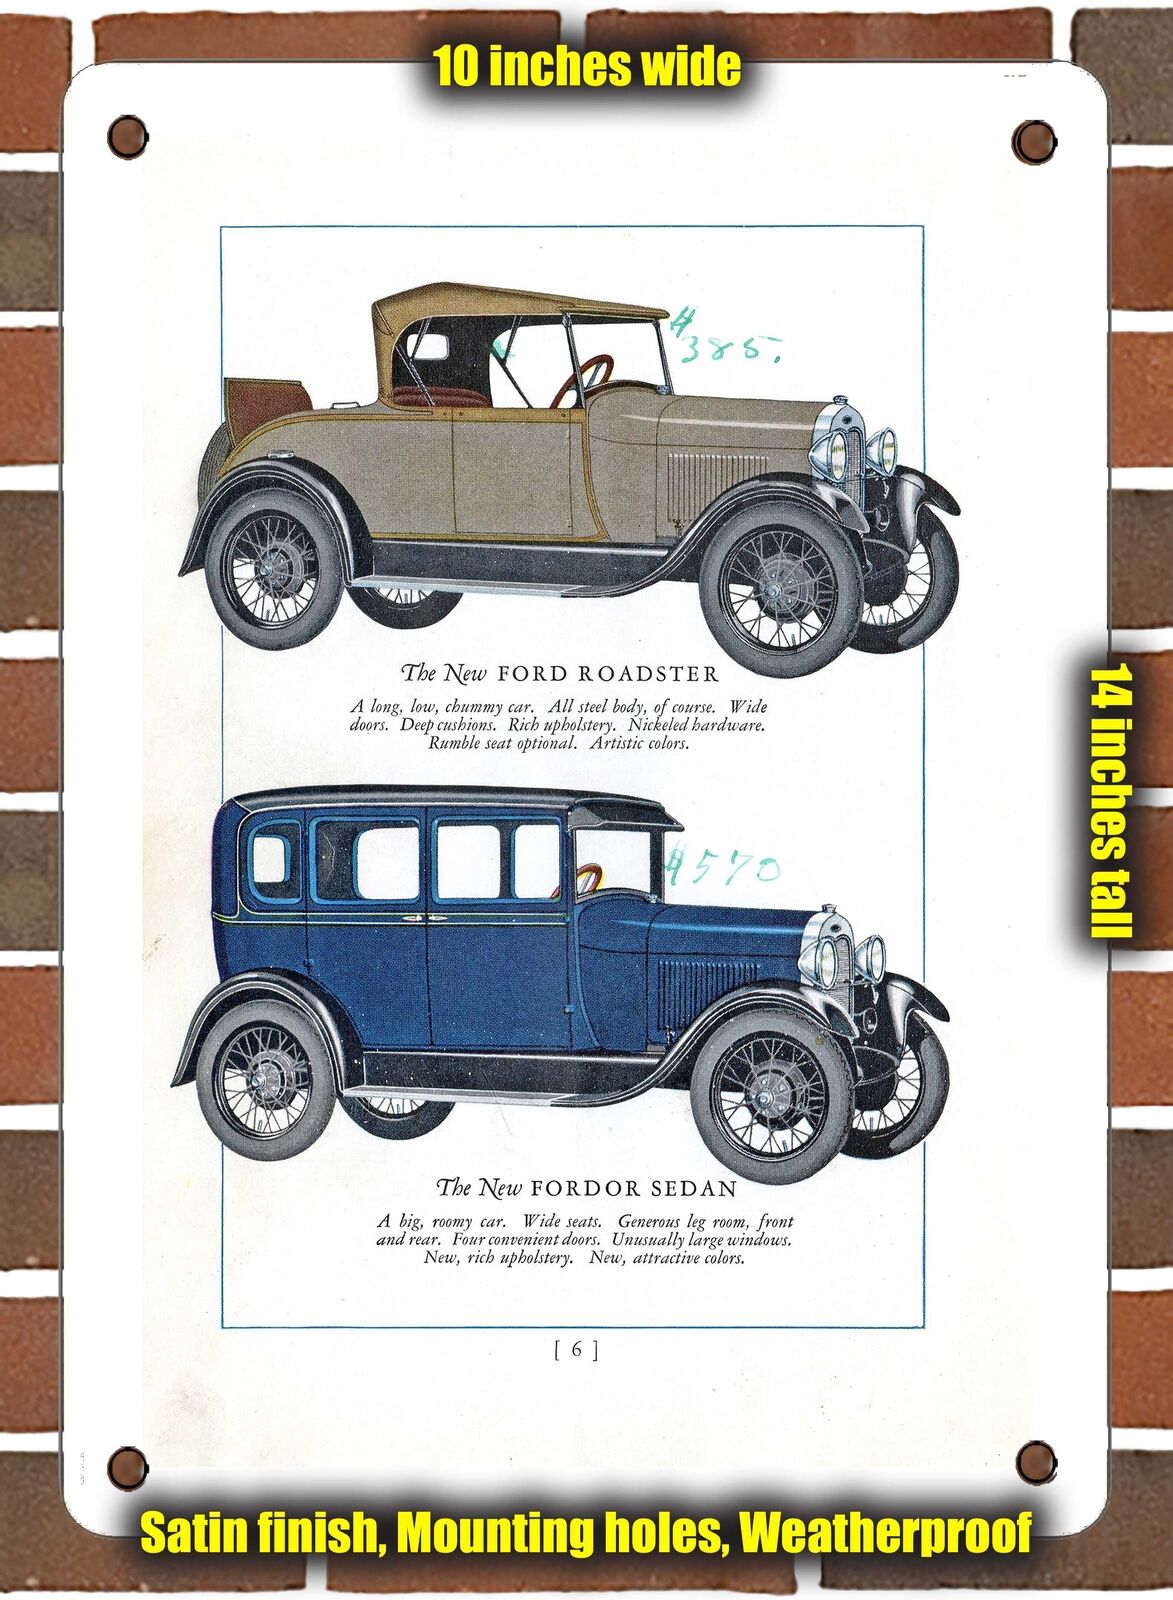 METAL SIGN - 1928 Model A Roadster Fordor Sedan - 10x14 Inches